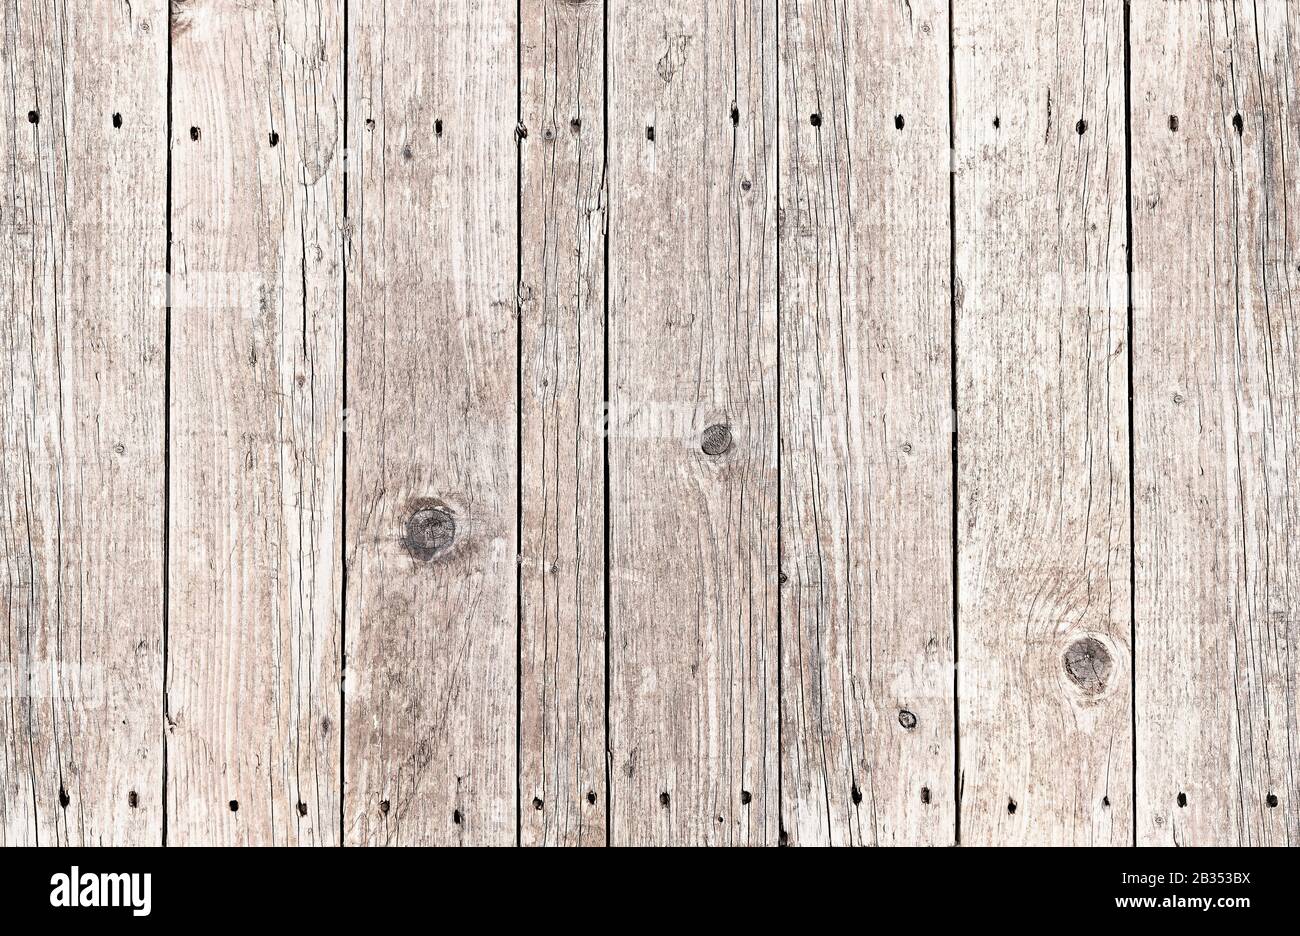 Detailed Wooden Pallet Texture as Background: tabletop closeup view of  nailed up and weathered wooden pallet boards Stock Photo